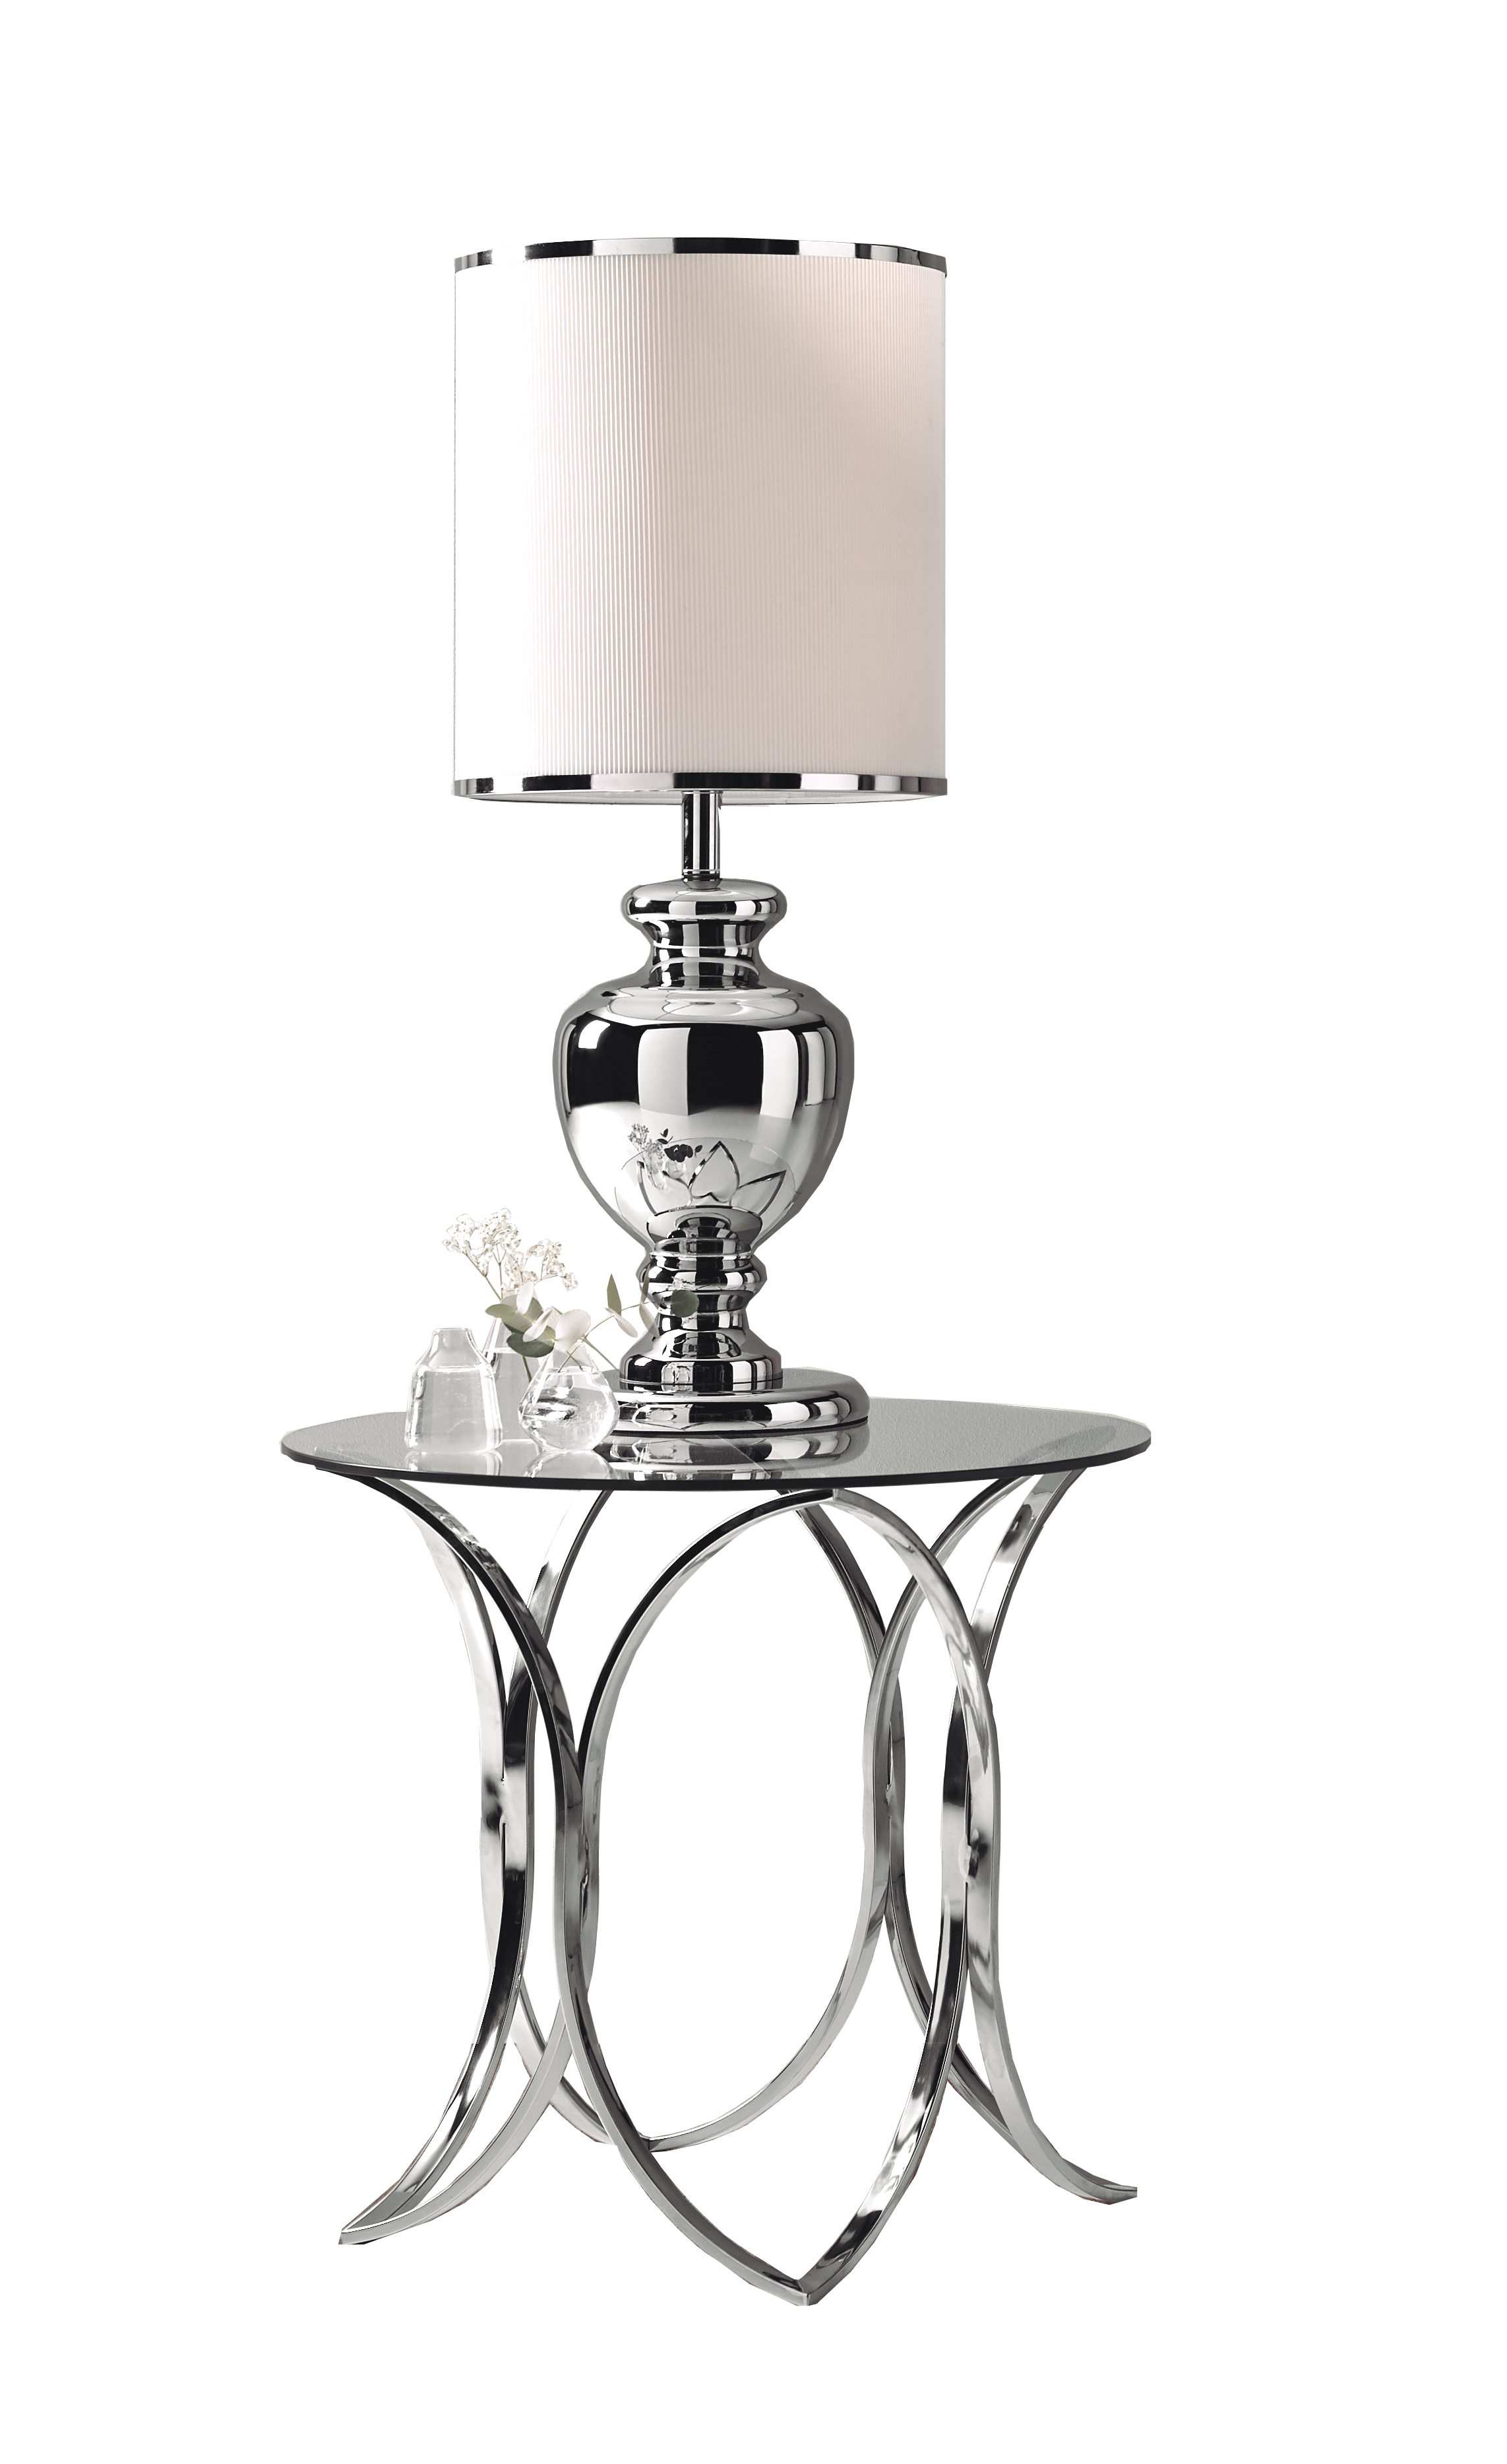 Brands Kuka Home CT-234 Coffee Table, LT-2294-C1W Table Lamp